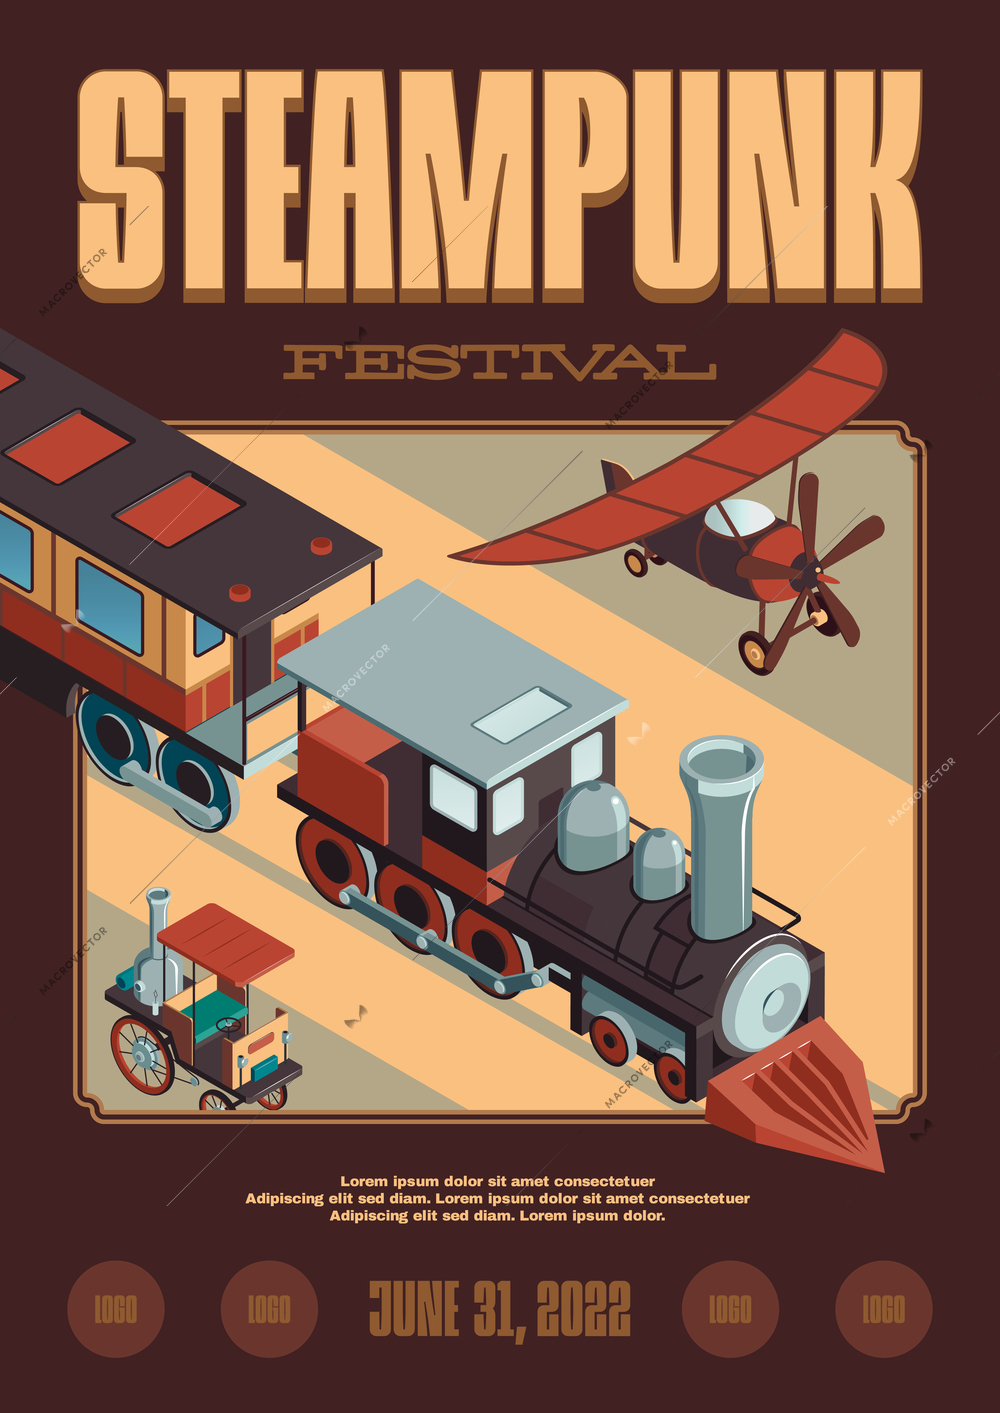 Steampunk vertical poster with editable text and event date with images of flying airplane and train vector illustration